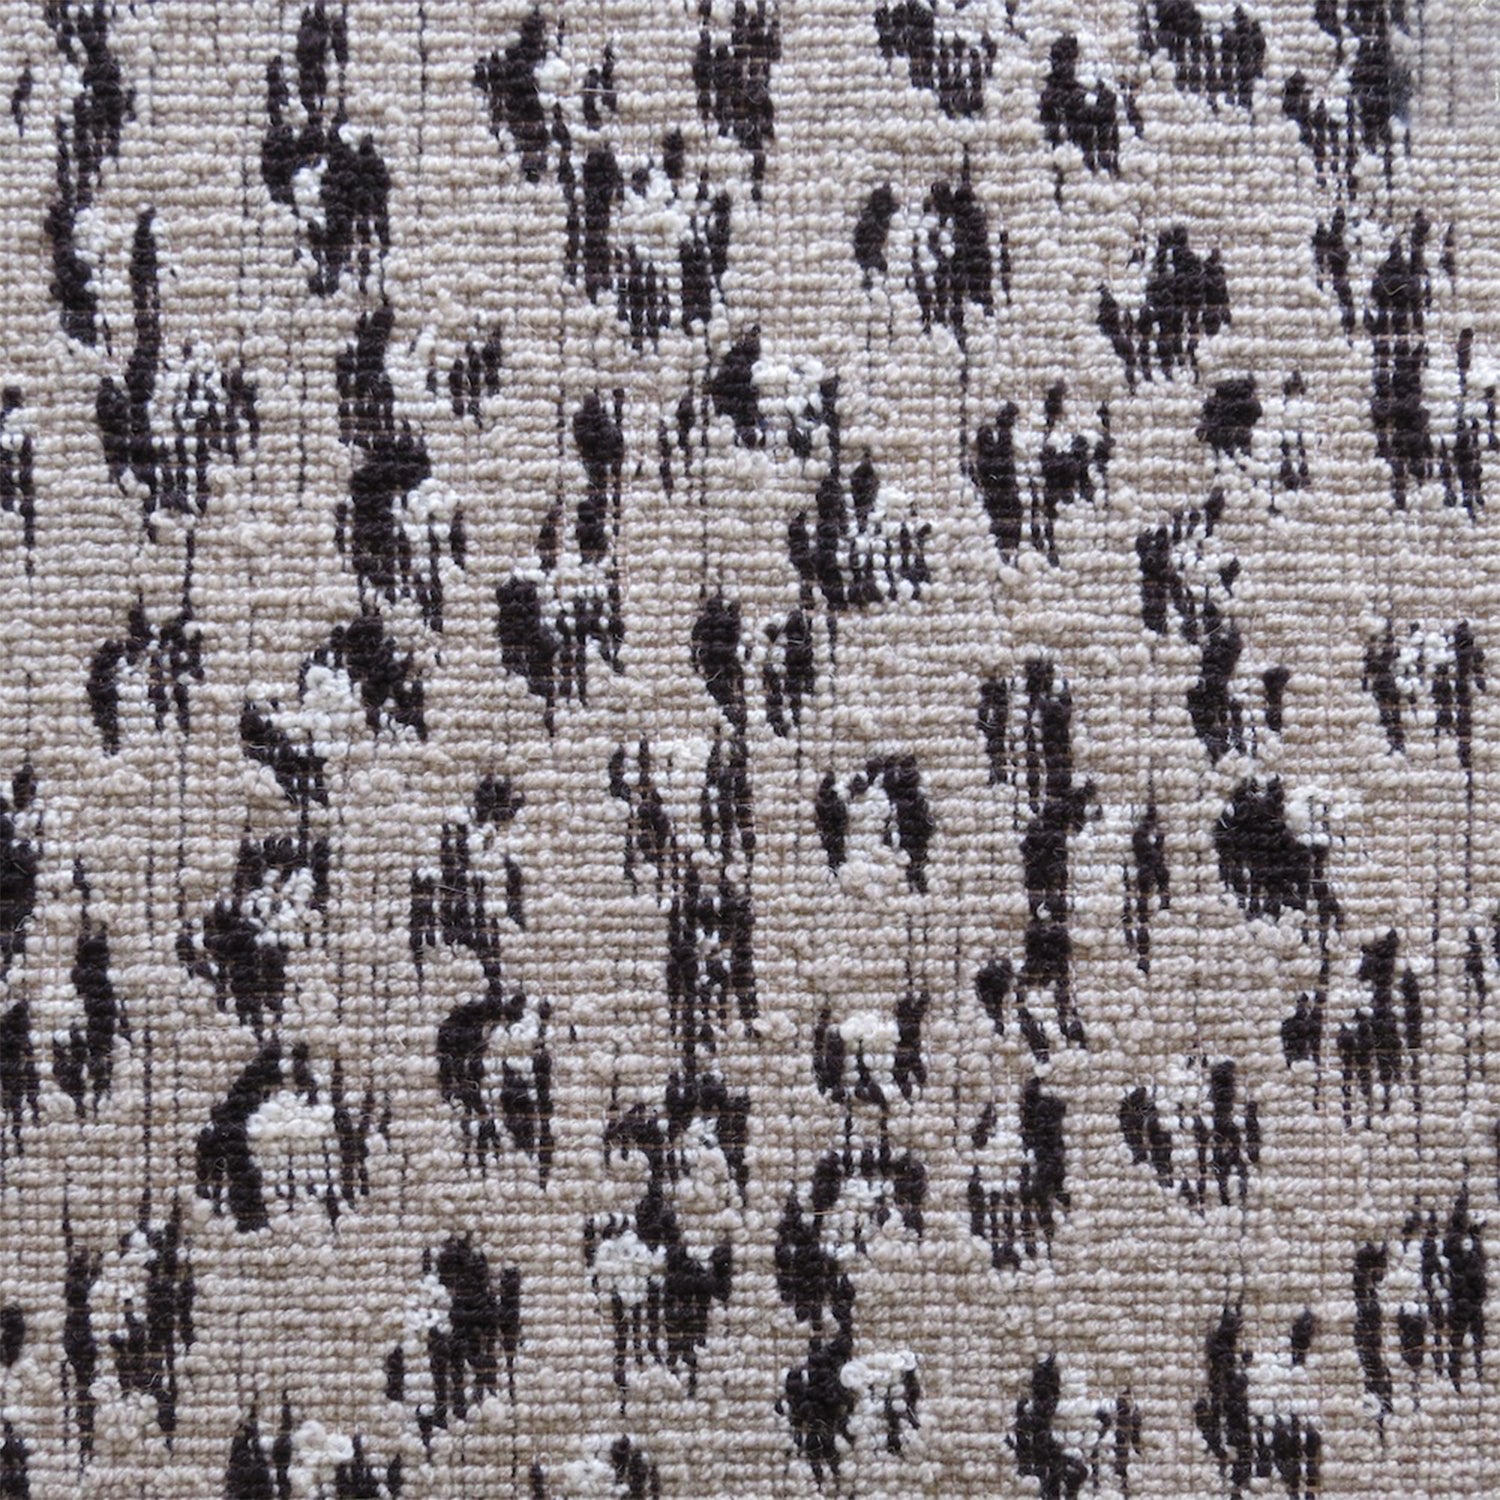 Wool broadloom carpet swatch in a painterly floral pattern in black and cream on a brown field.